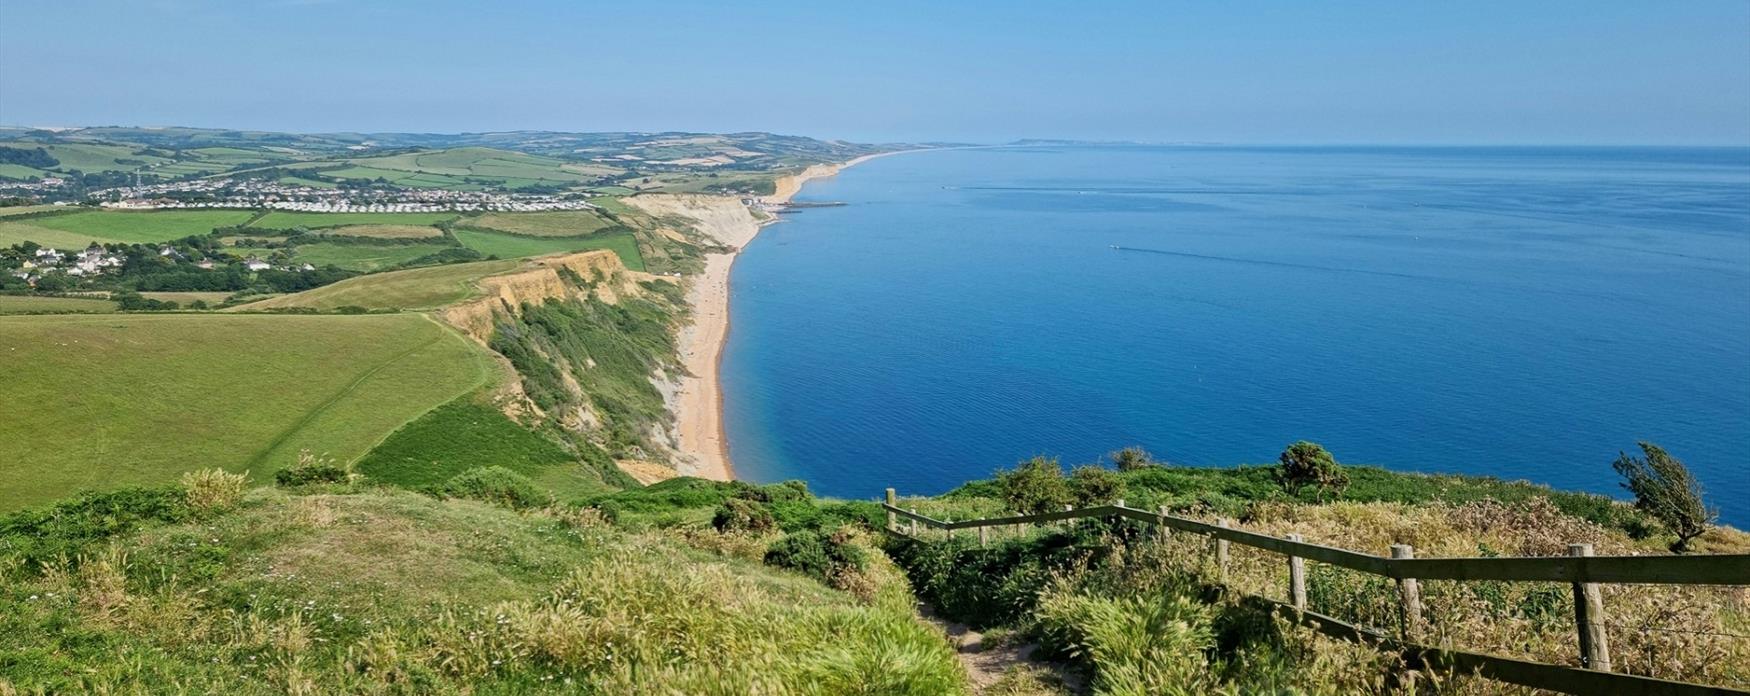 The South West Coast Path looking east from Thorncombe Beacon, West Dorset.